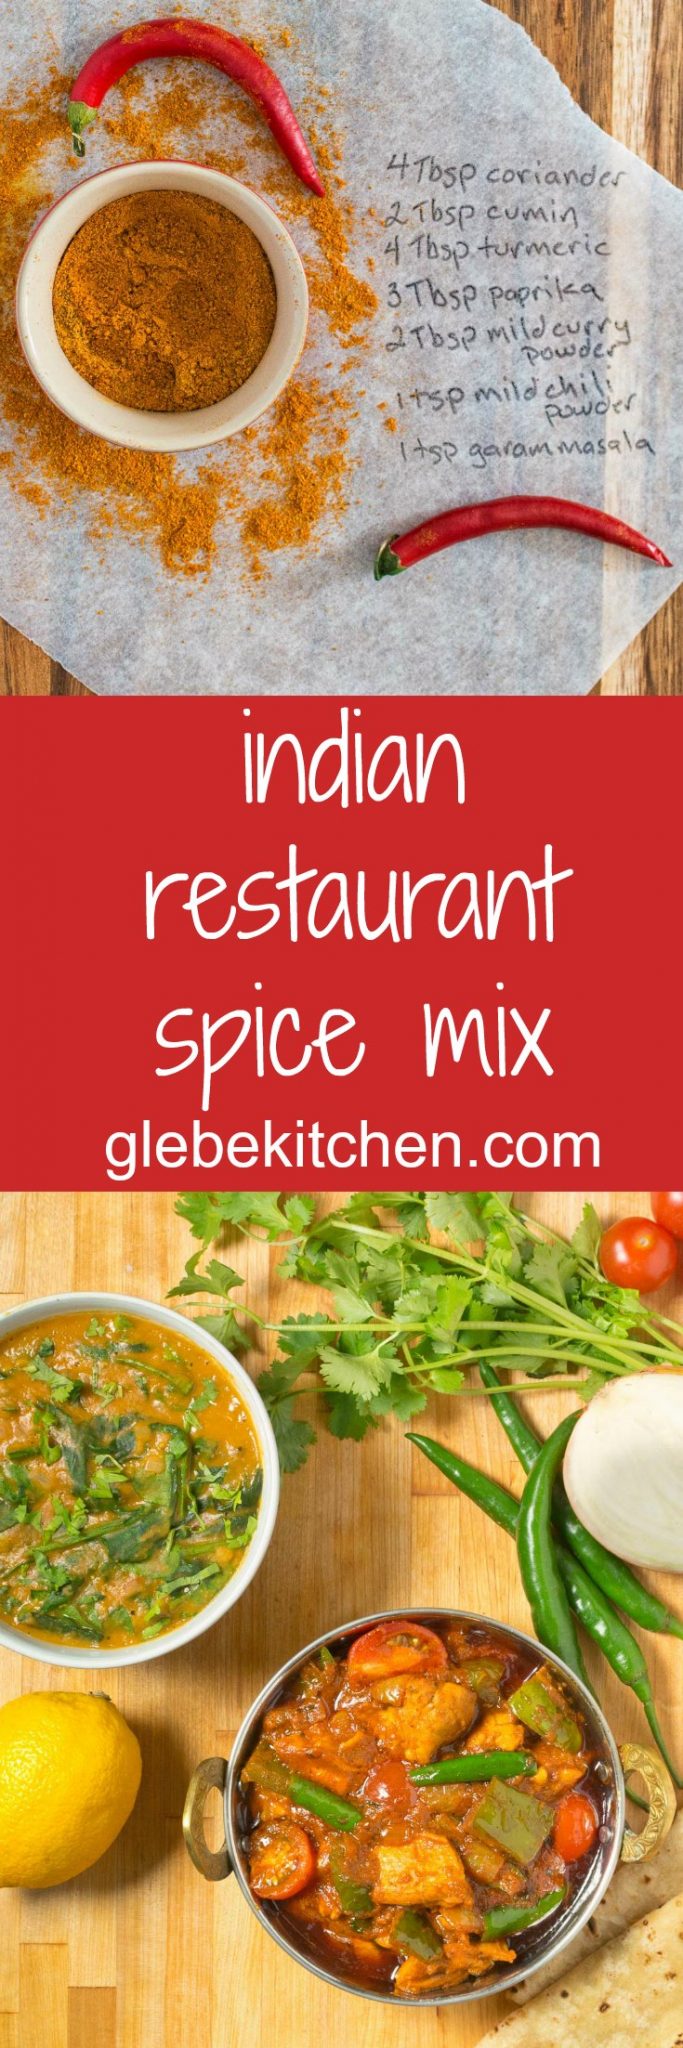 This simple Indian restaurant spice mix can be used to make almost any Indian restaurant curry.